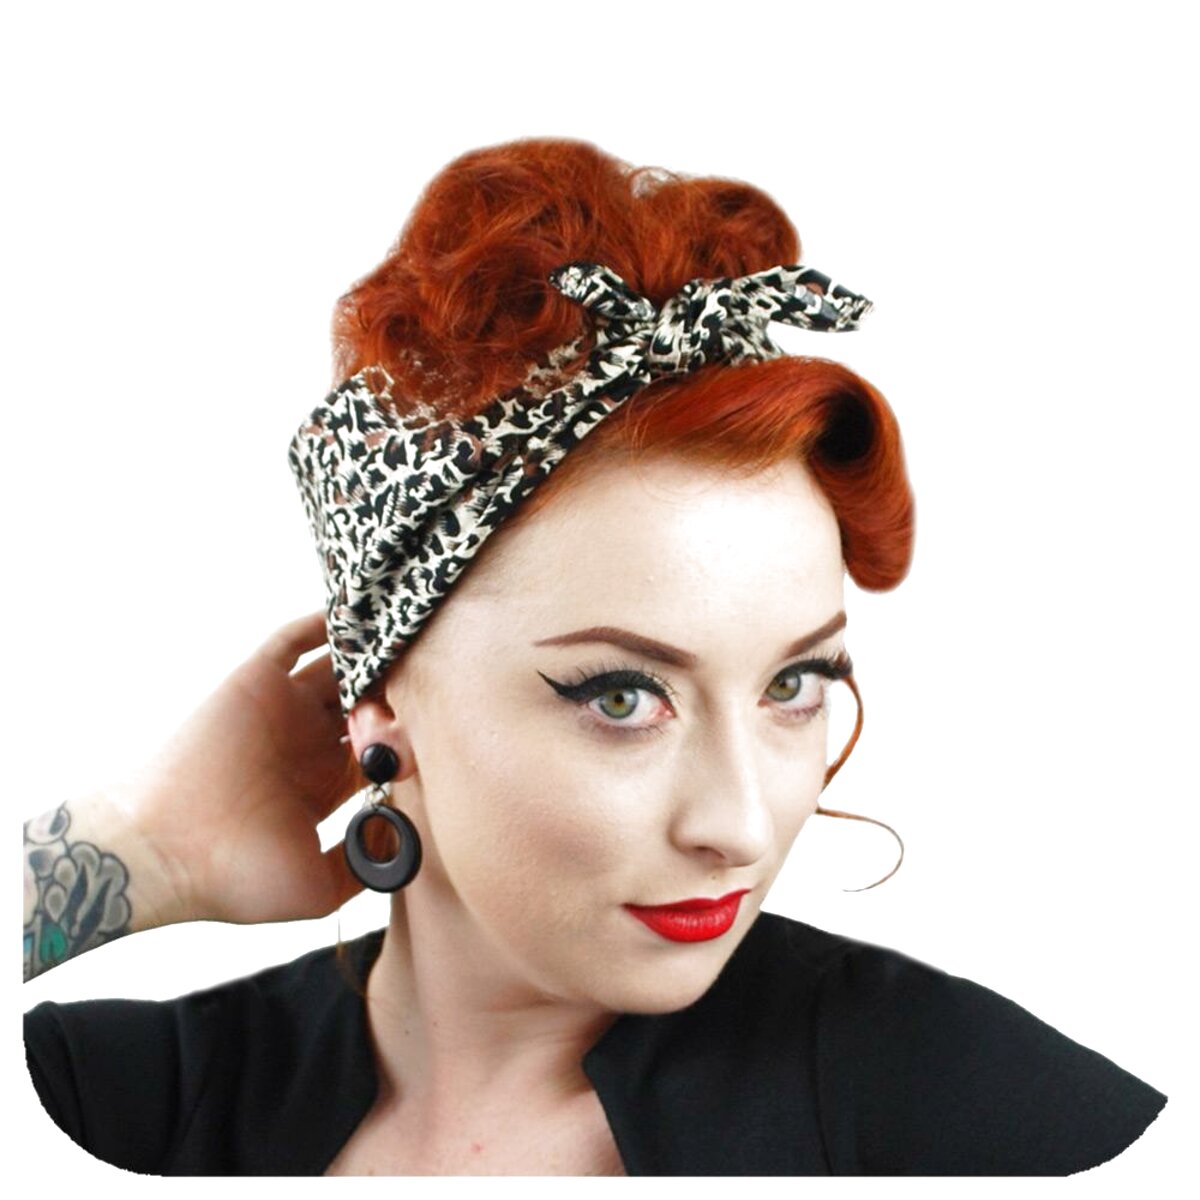 Rockabilly Head Scarf for sale in UK | View 19 bargains